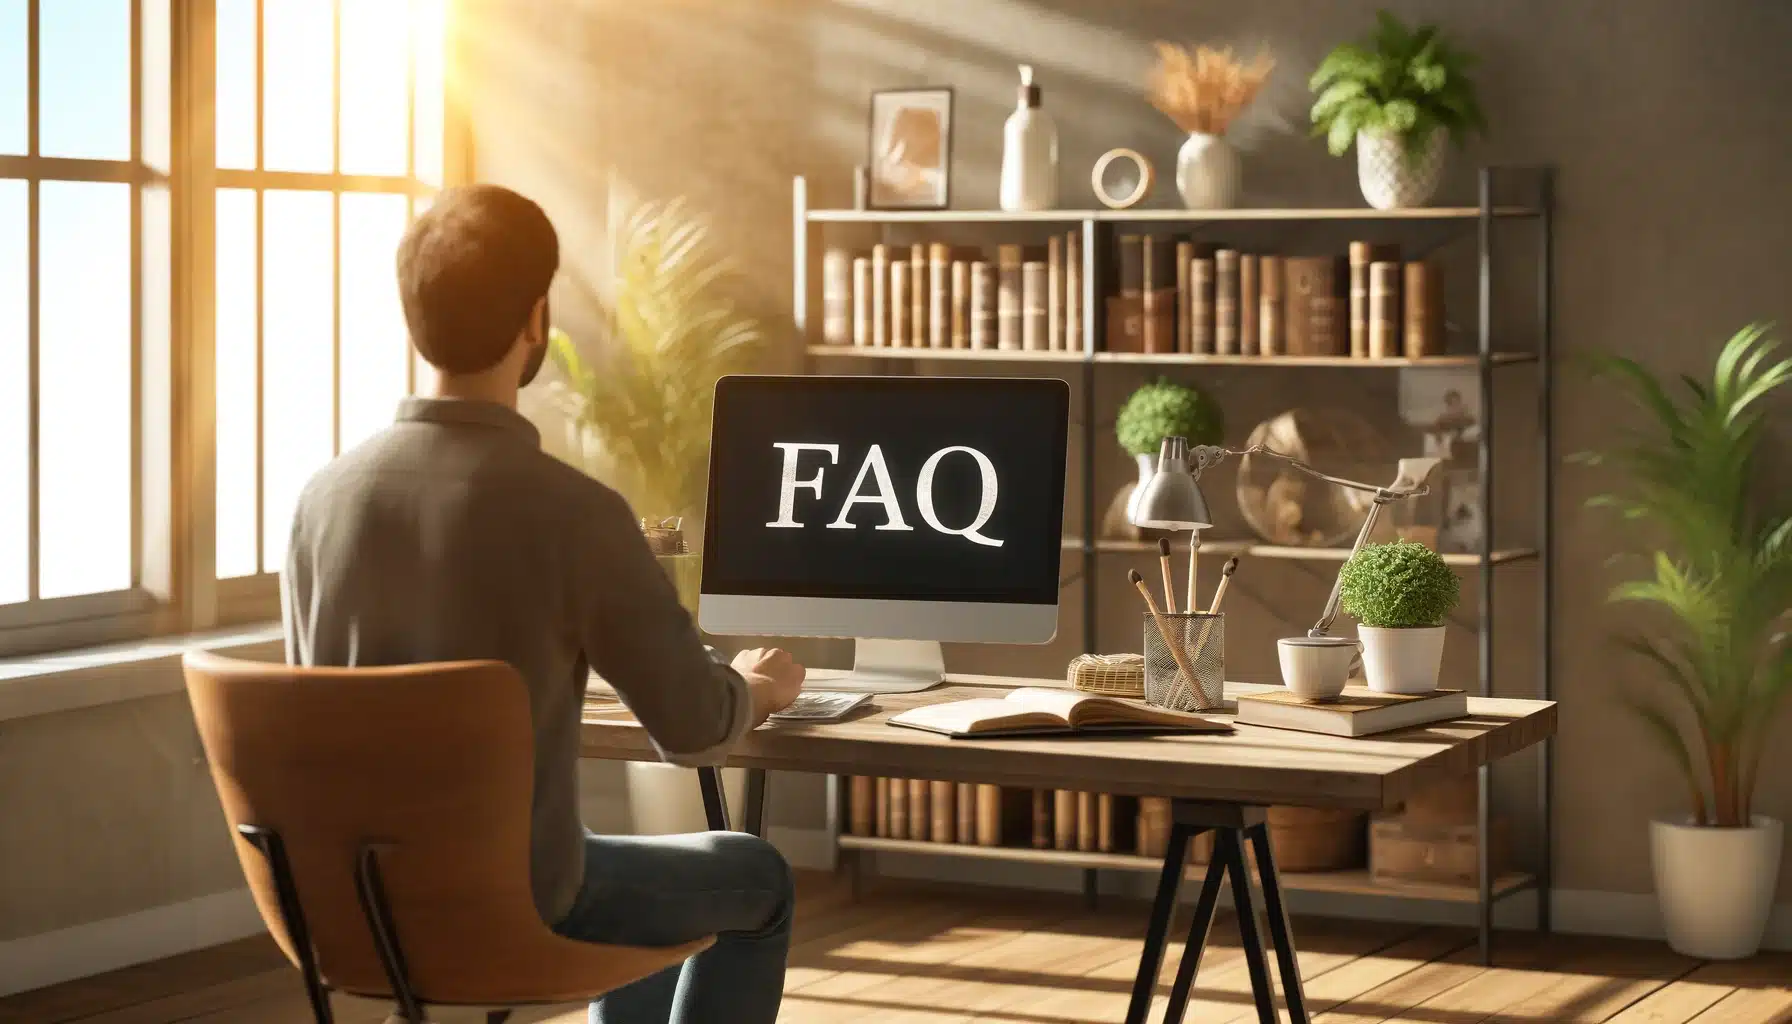 A person sitting on a chair looking at a laptop displaying 'FAQ' on the screen, surrounded by a notebook, pen, coffee cup, and plants in a well-lit modern workspace.